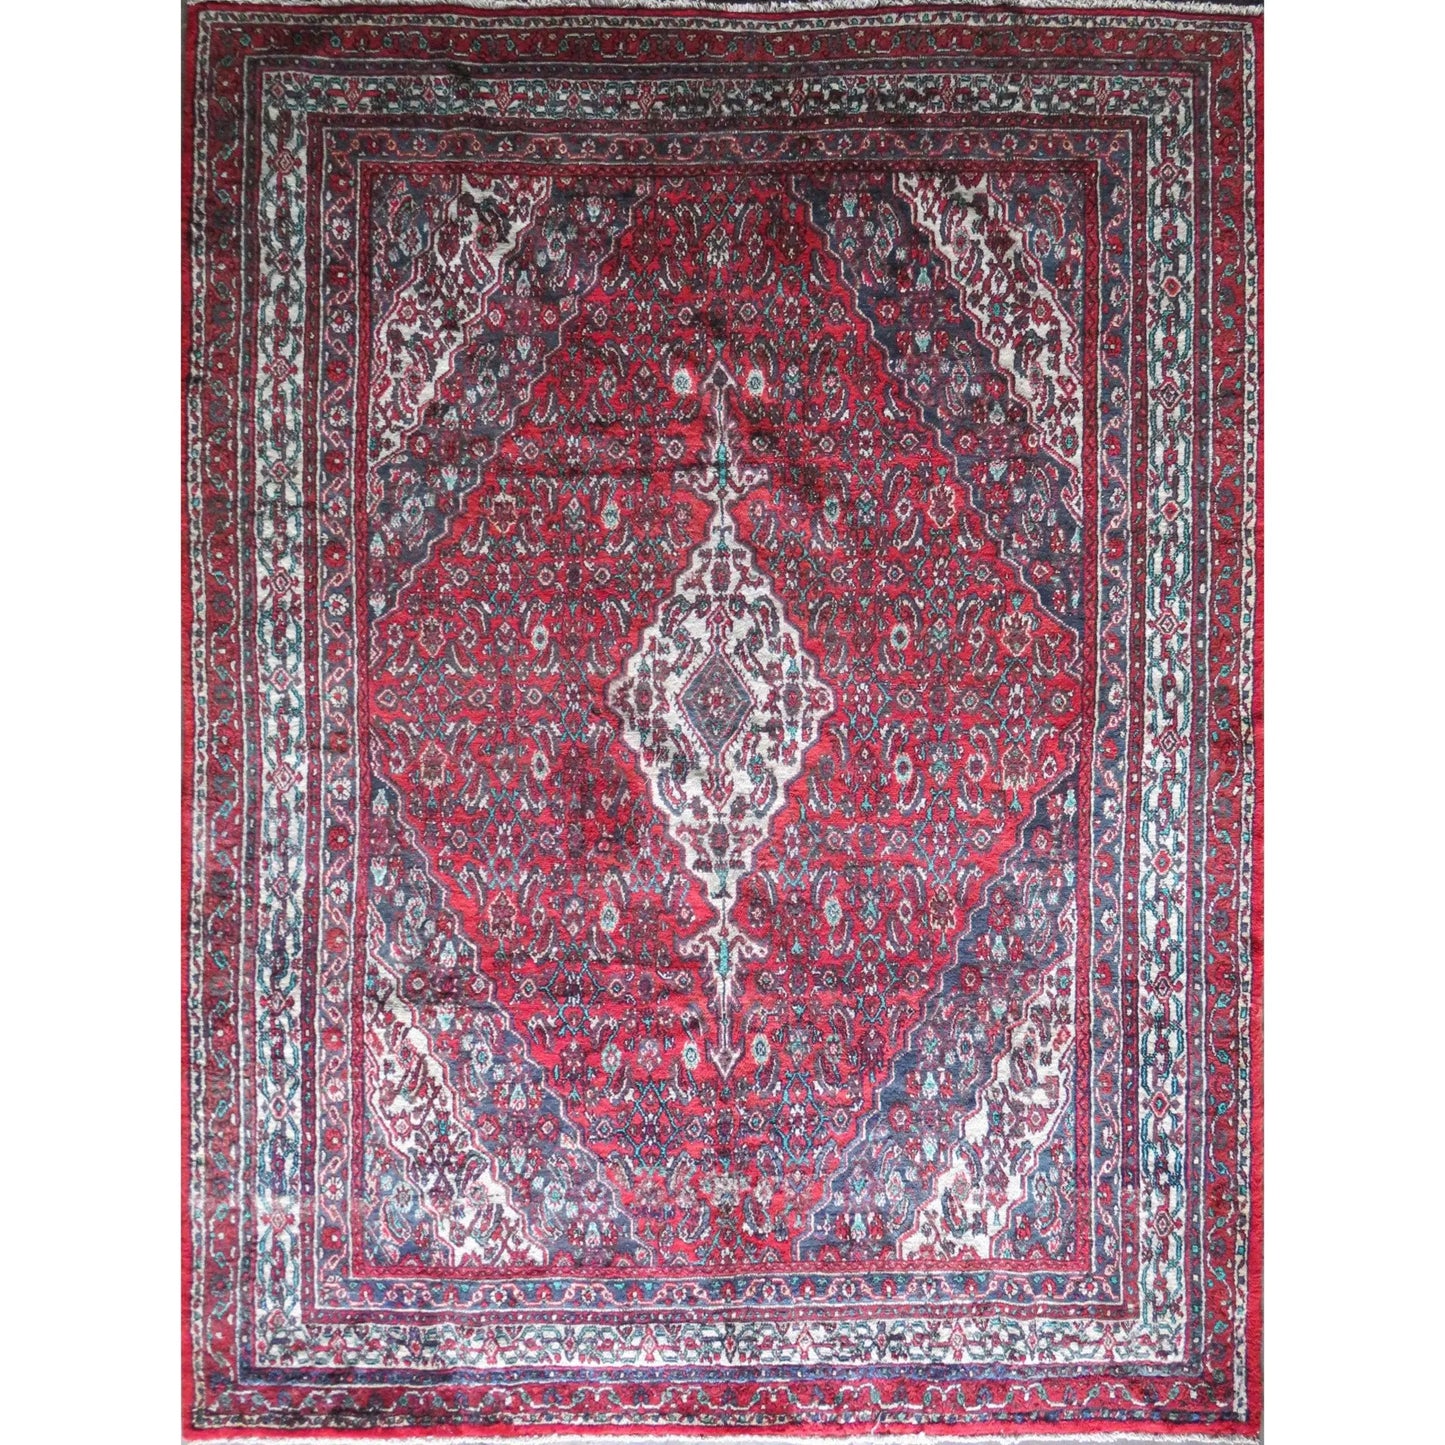 Hand-Knotted Persian Wool Rug _ Luxurious Vintage Design, 11'7" x 9'0", Artisan Crafted